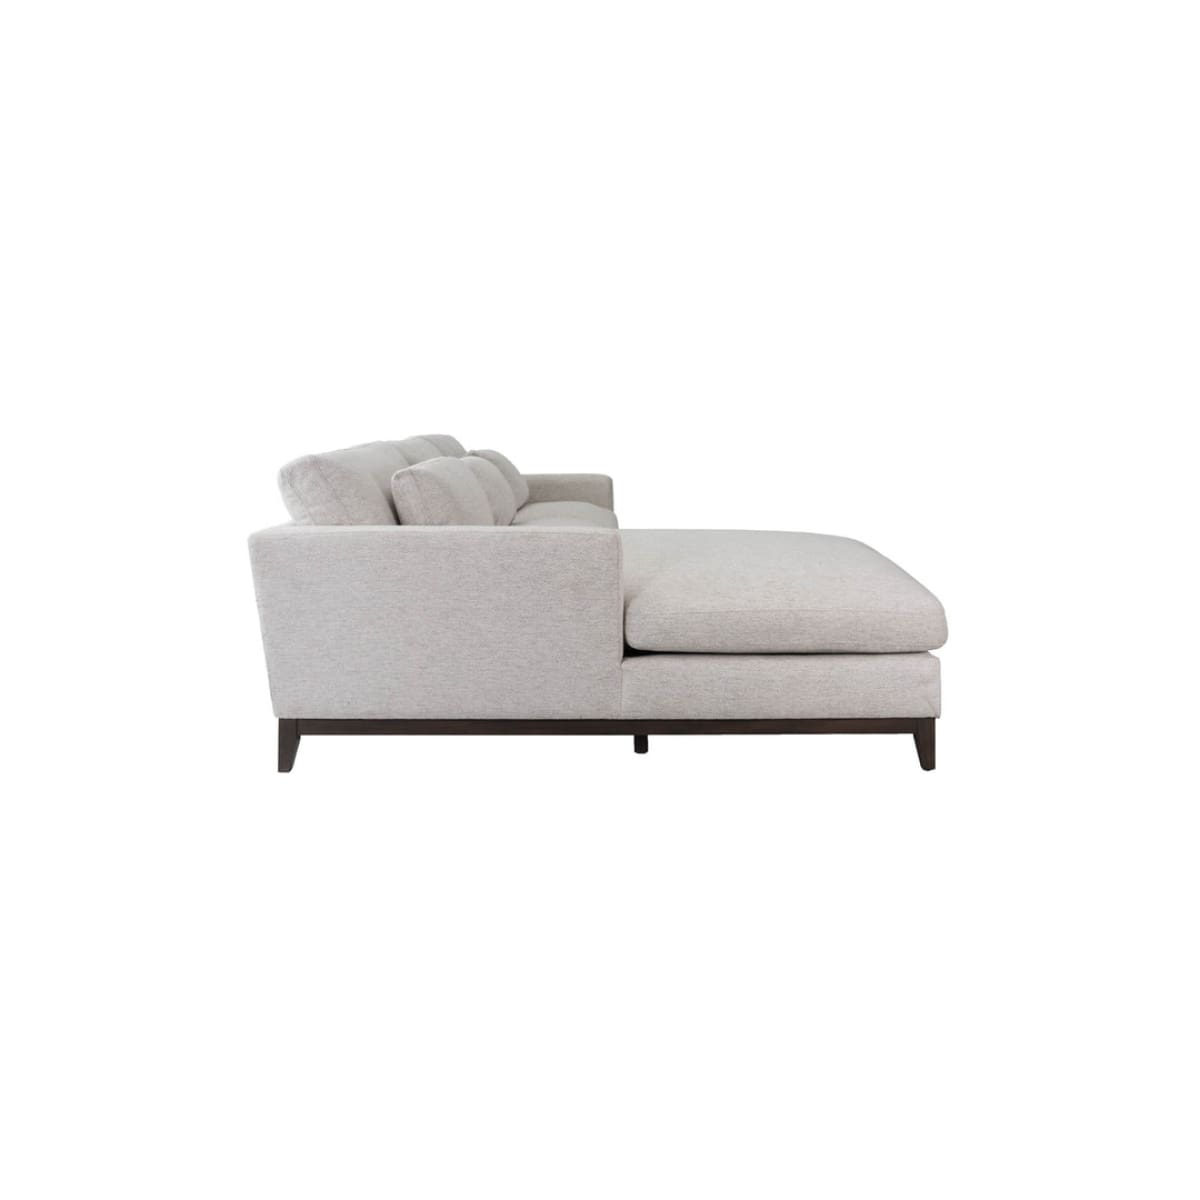 Oxford Left Sectional Sofa - Travertine Cream - lh-import-sectionals